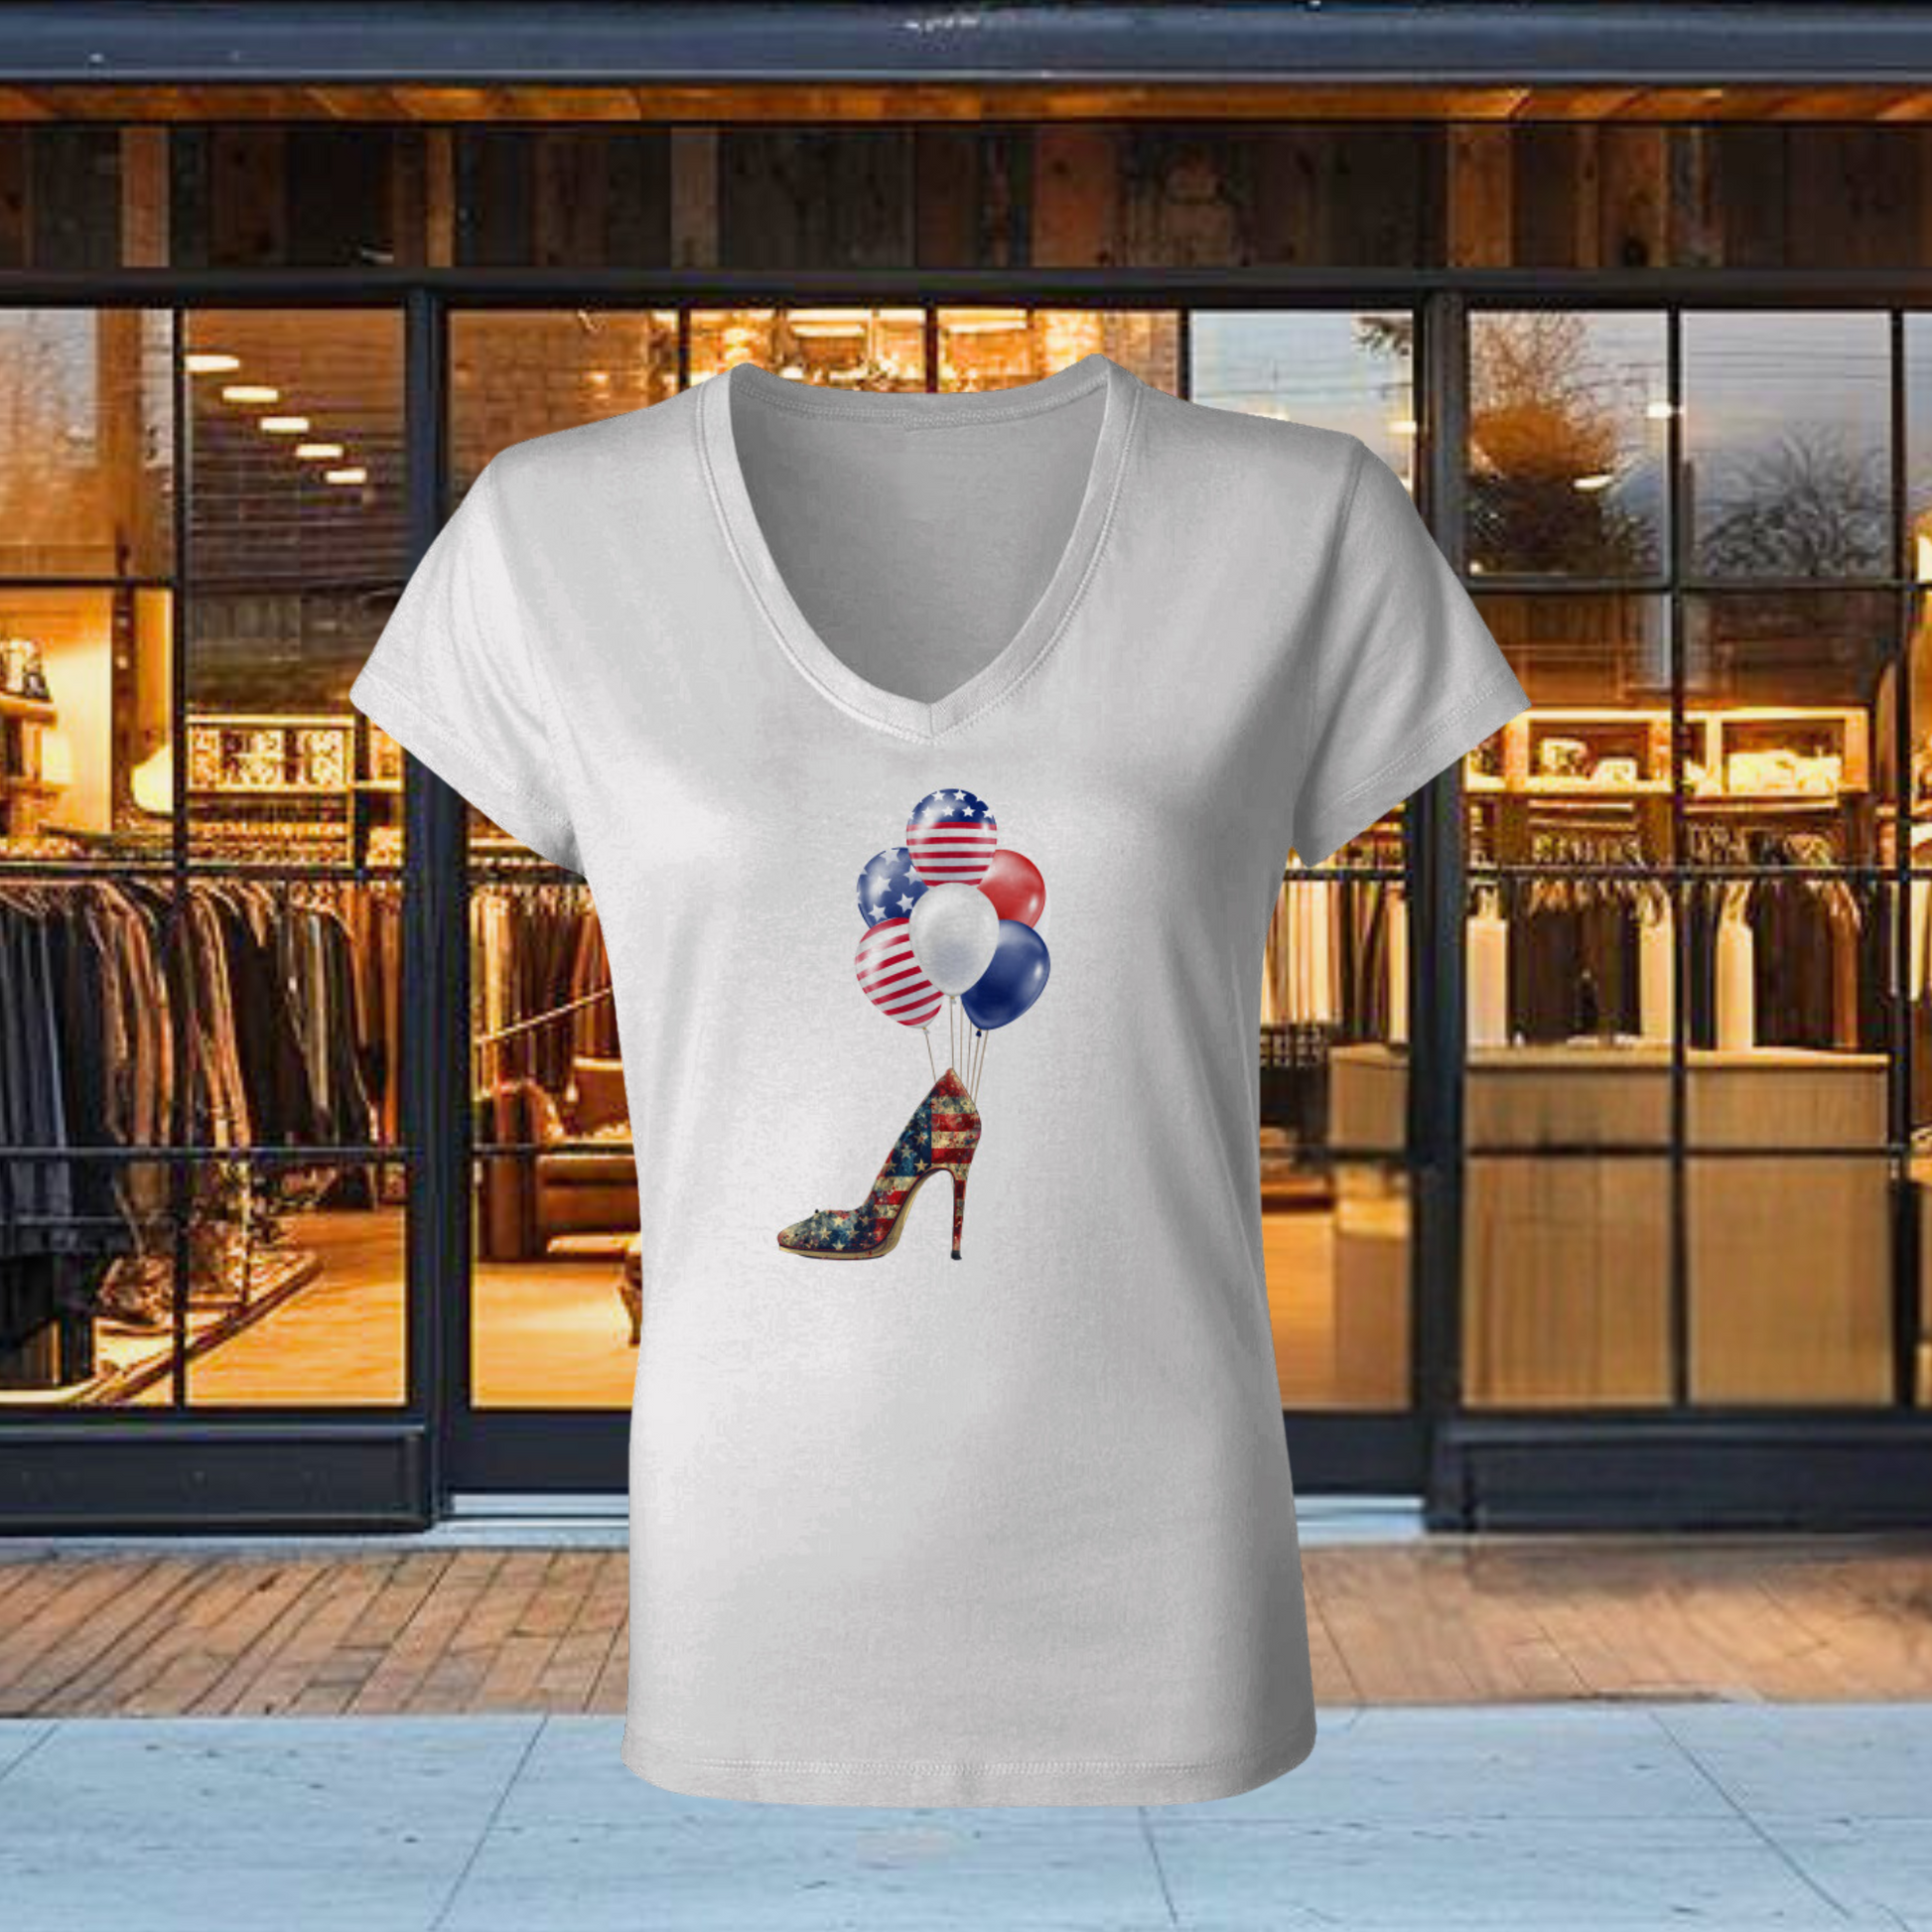 The Bella Canvas Women’s Jersey V Neck is going to be your next favorite tee. It features a modern feminine fit with a classic V-neck created with superior combed and ring-spun cotton that can be worn all year round. This slim fitting tee is comfortable to wear to work or evening wear.